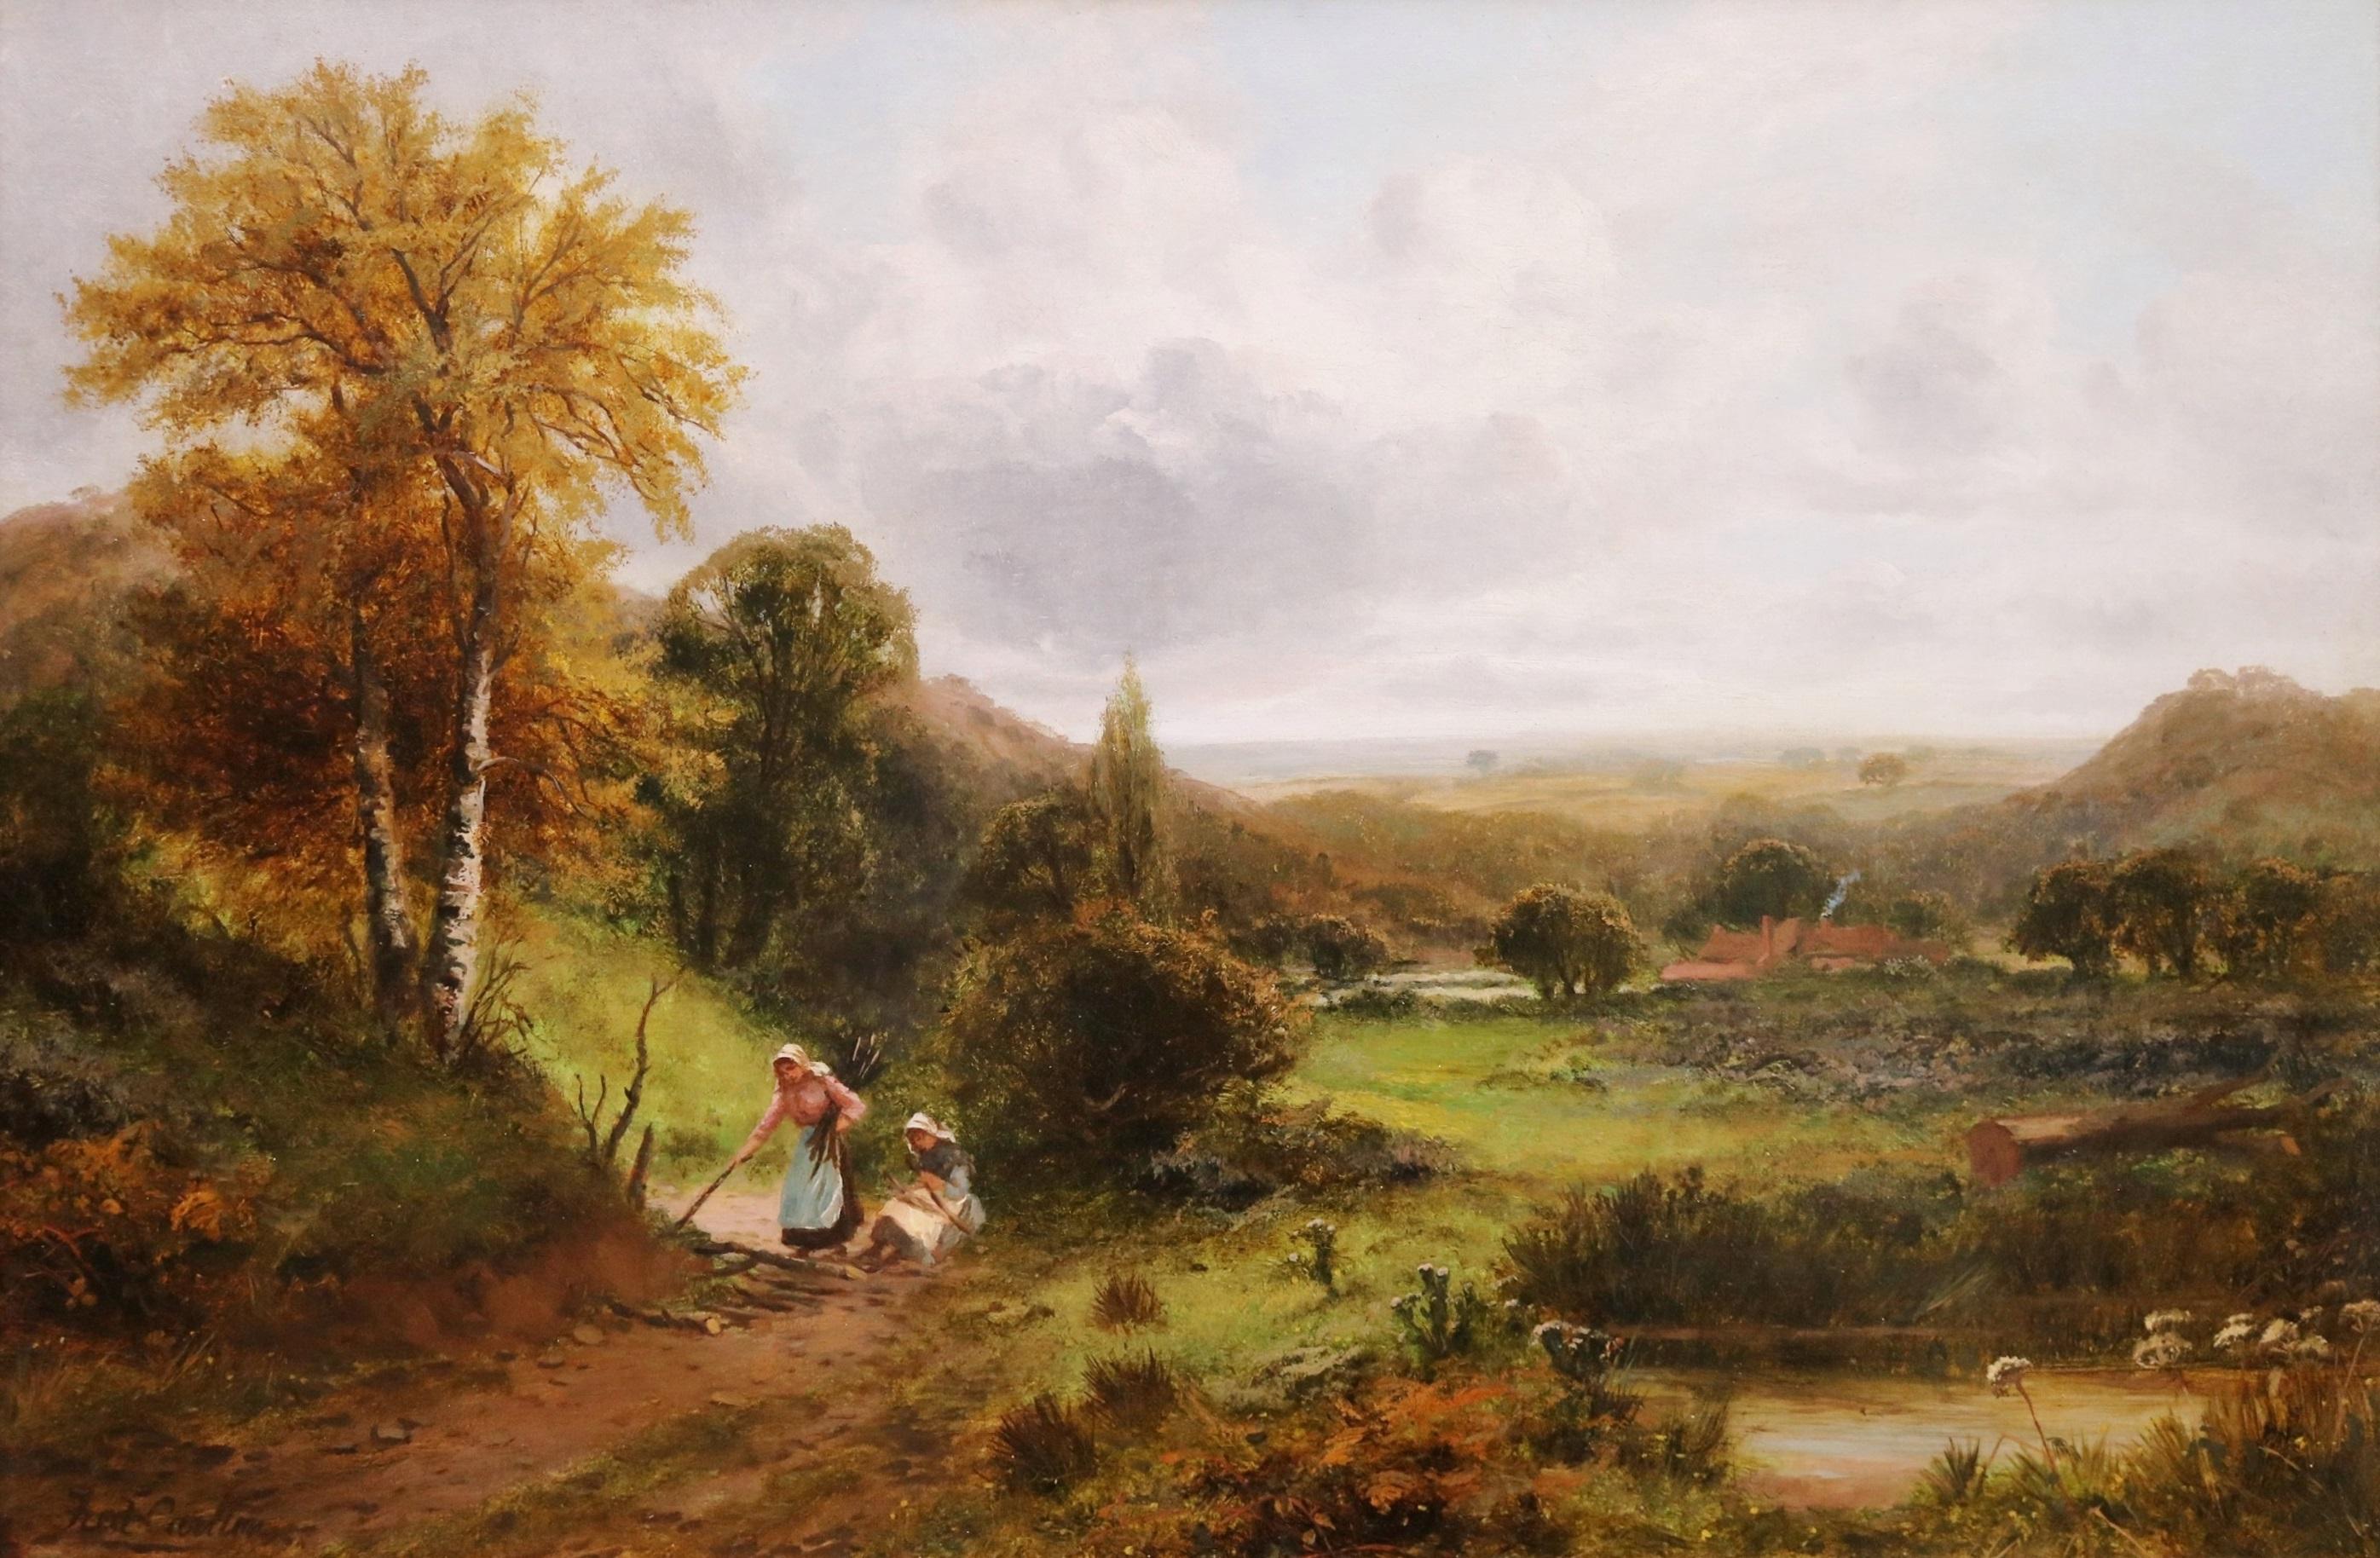 ‘Faggot Gatherers, Surrey’ by Frederick Carlton (fl. 1880-1900). The painting - which depicts two girls collecting firewood before a cottage in an extensive Autumn landscape - is signed by the artist and is presented in a fine quality bespoke gold